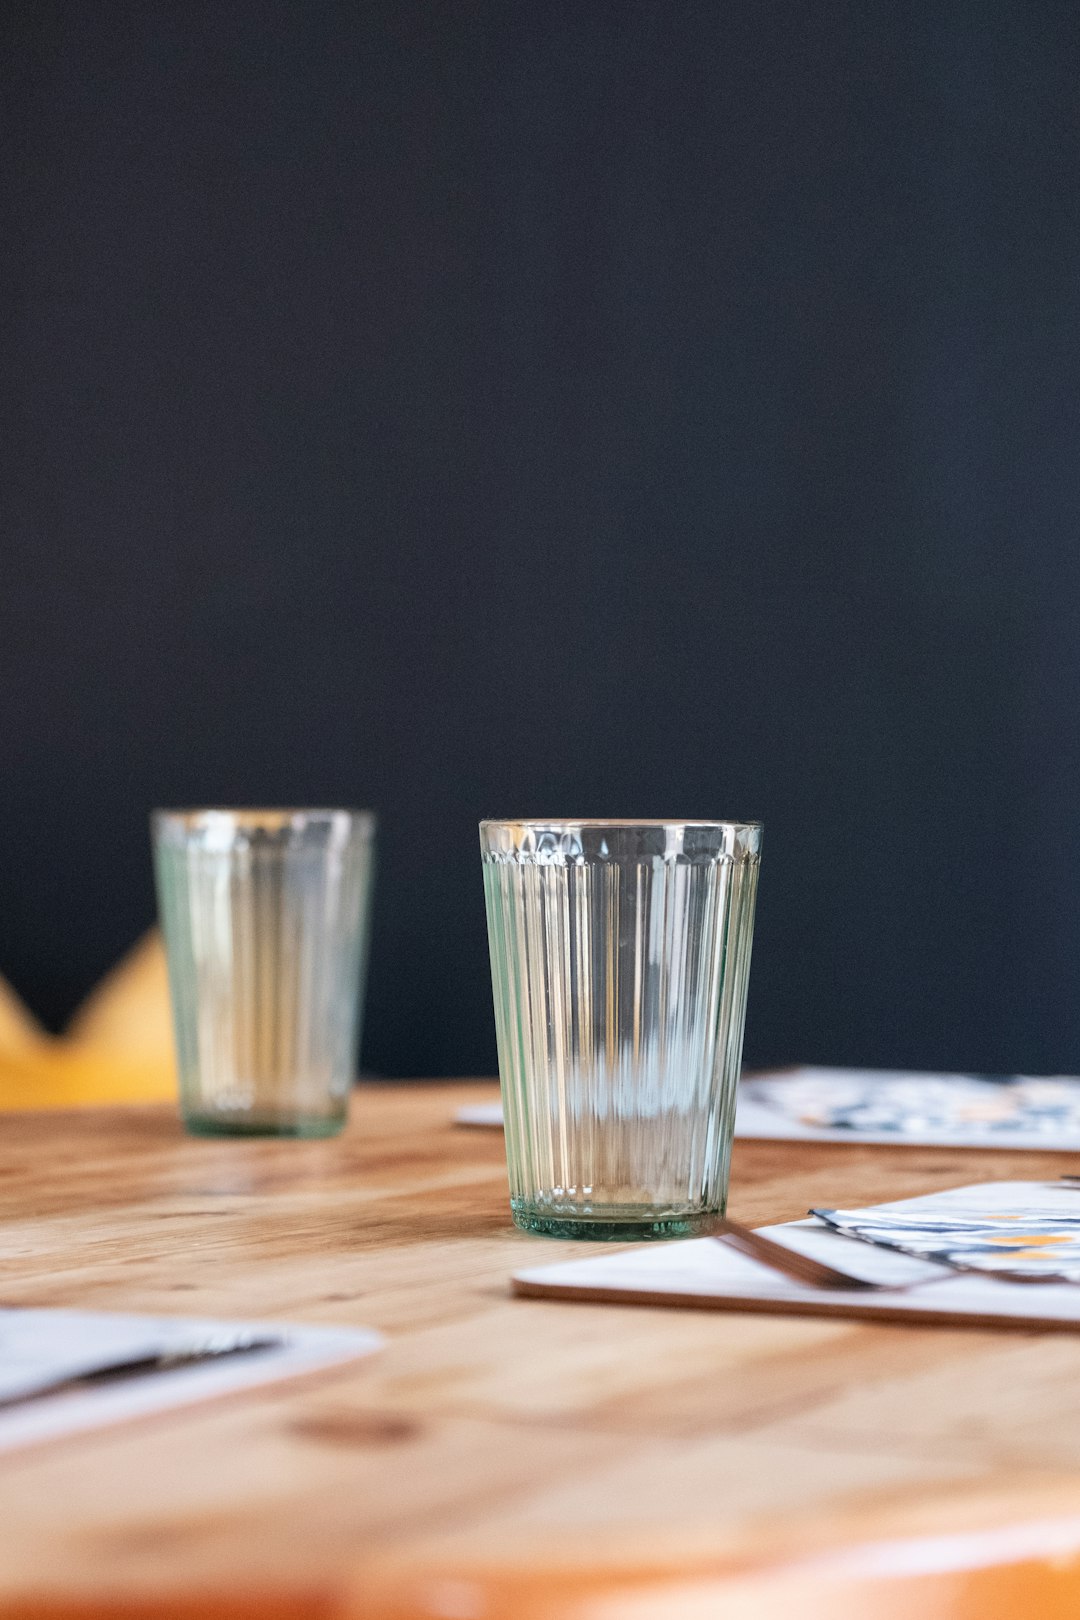 2 Clear Drinking Glasses On Brown Wooden Table Photo Free Image On Unsplash